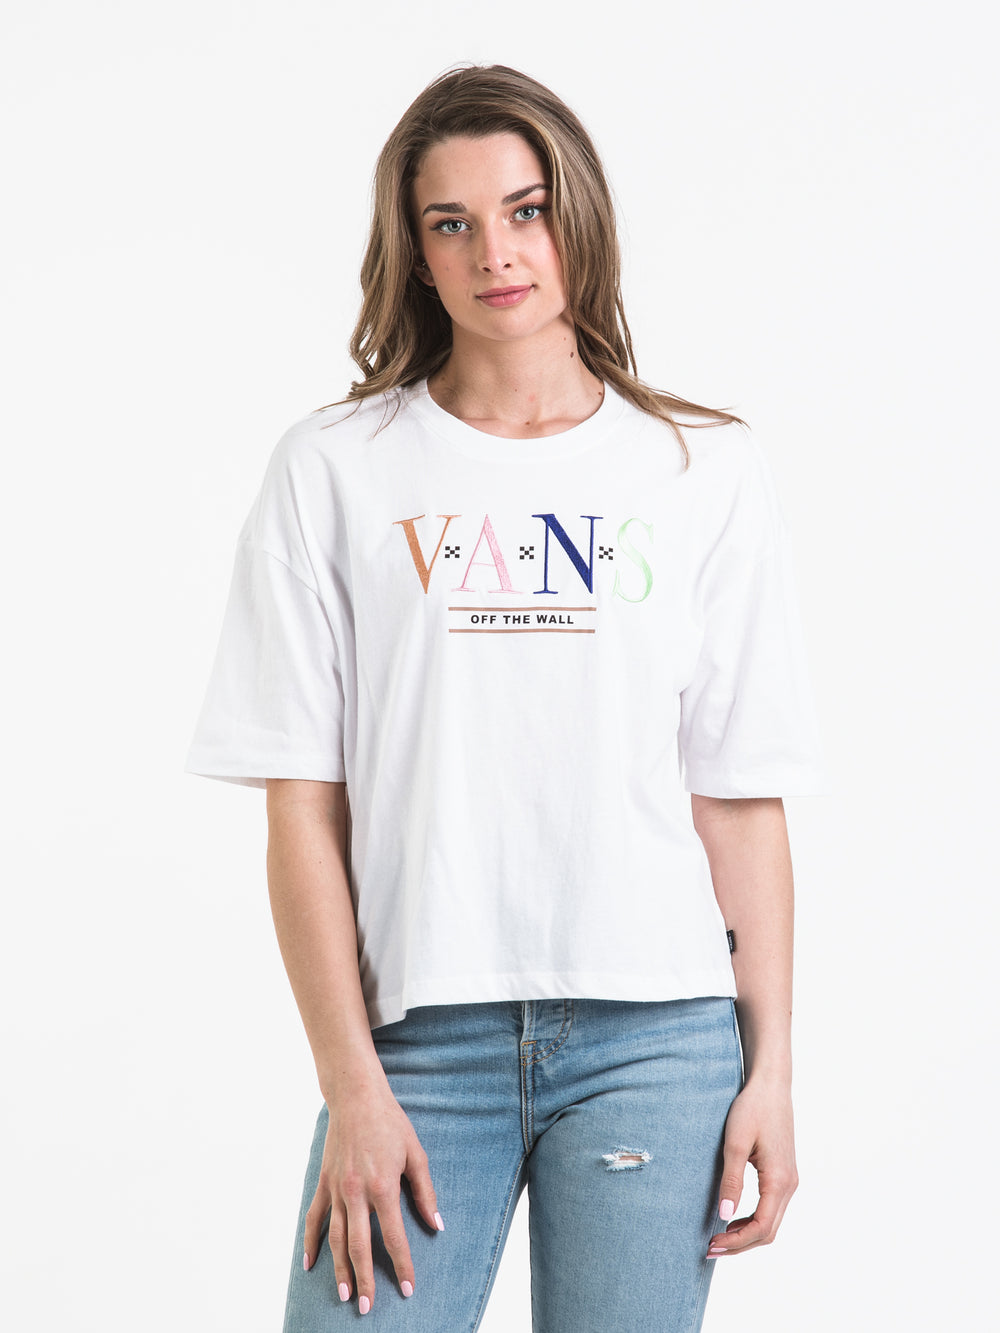 VANS BURN SLOW EMBROIDERED LOGO T-SHIRT - CLEARANCE